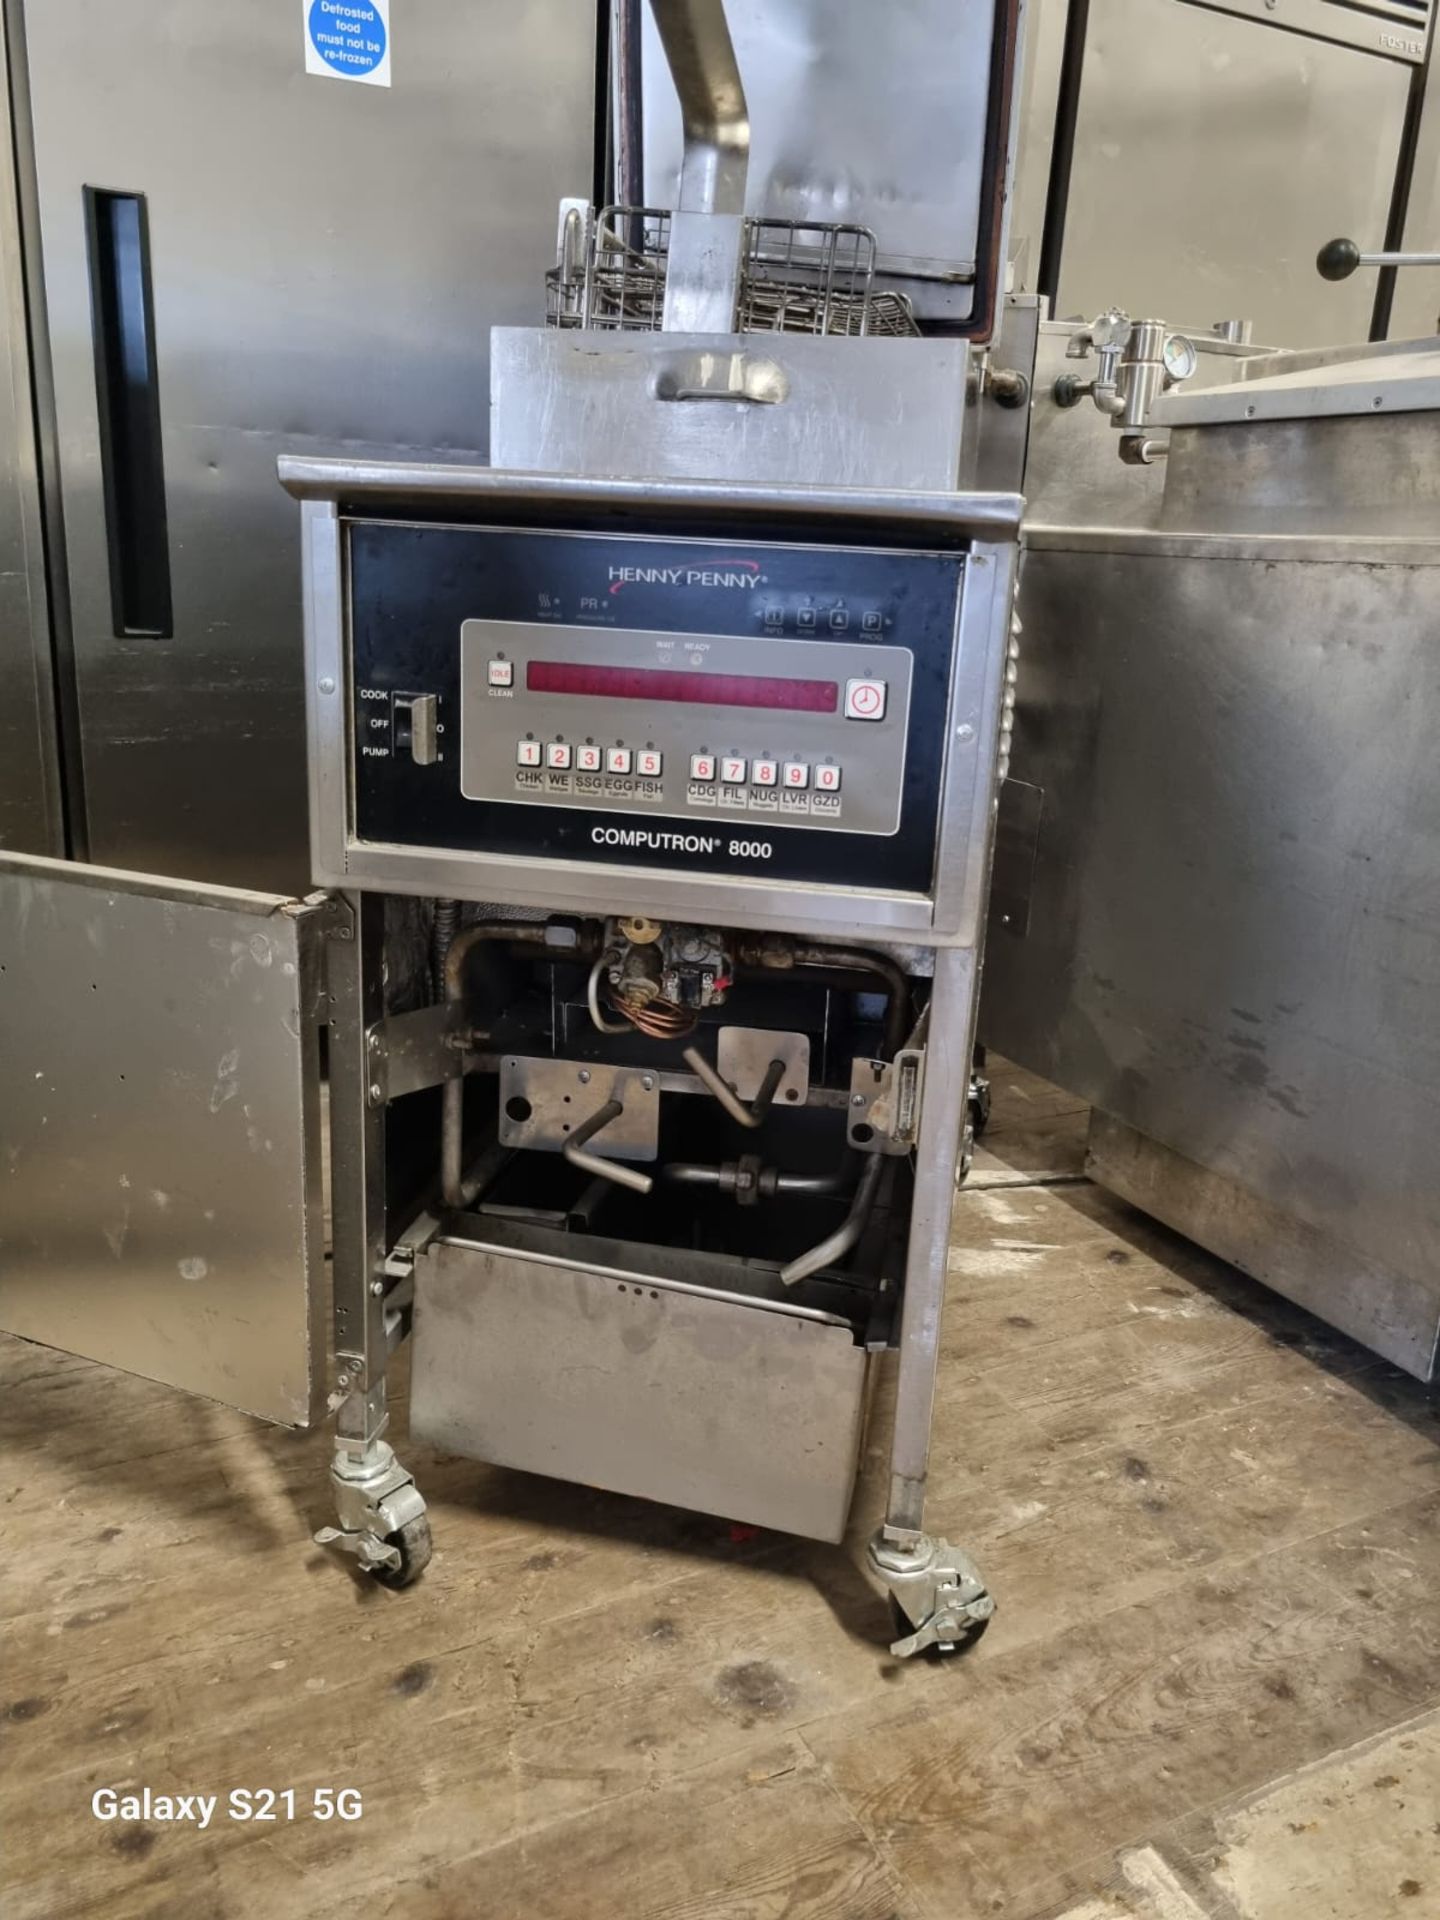 HENNY PENNY COMPUTEON 8000 GAS PRESSURE FRYER - FULLY SERVICED AND TESTED - ALL ORIGINAL PARTS  - Image 2 of 8